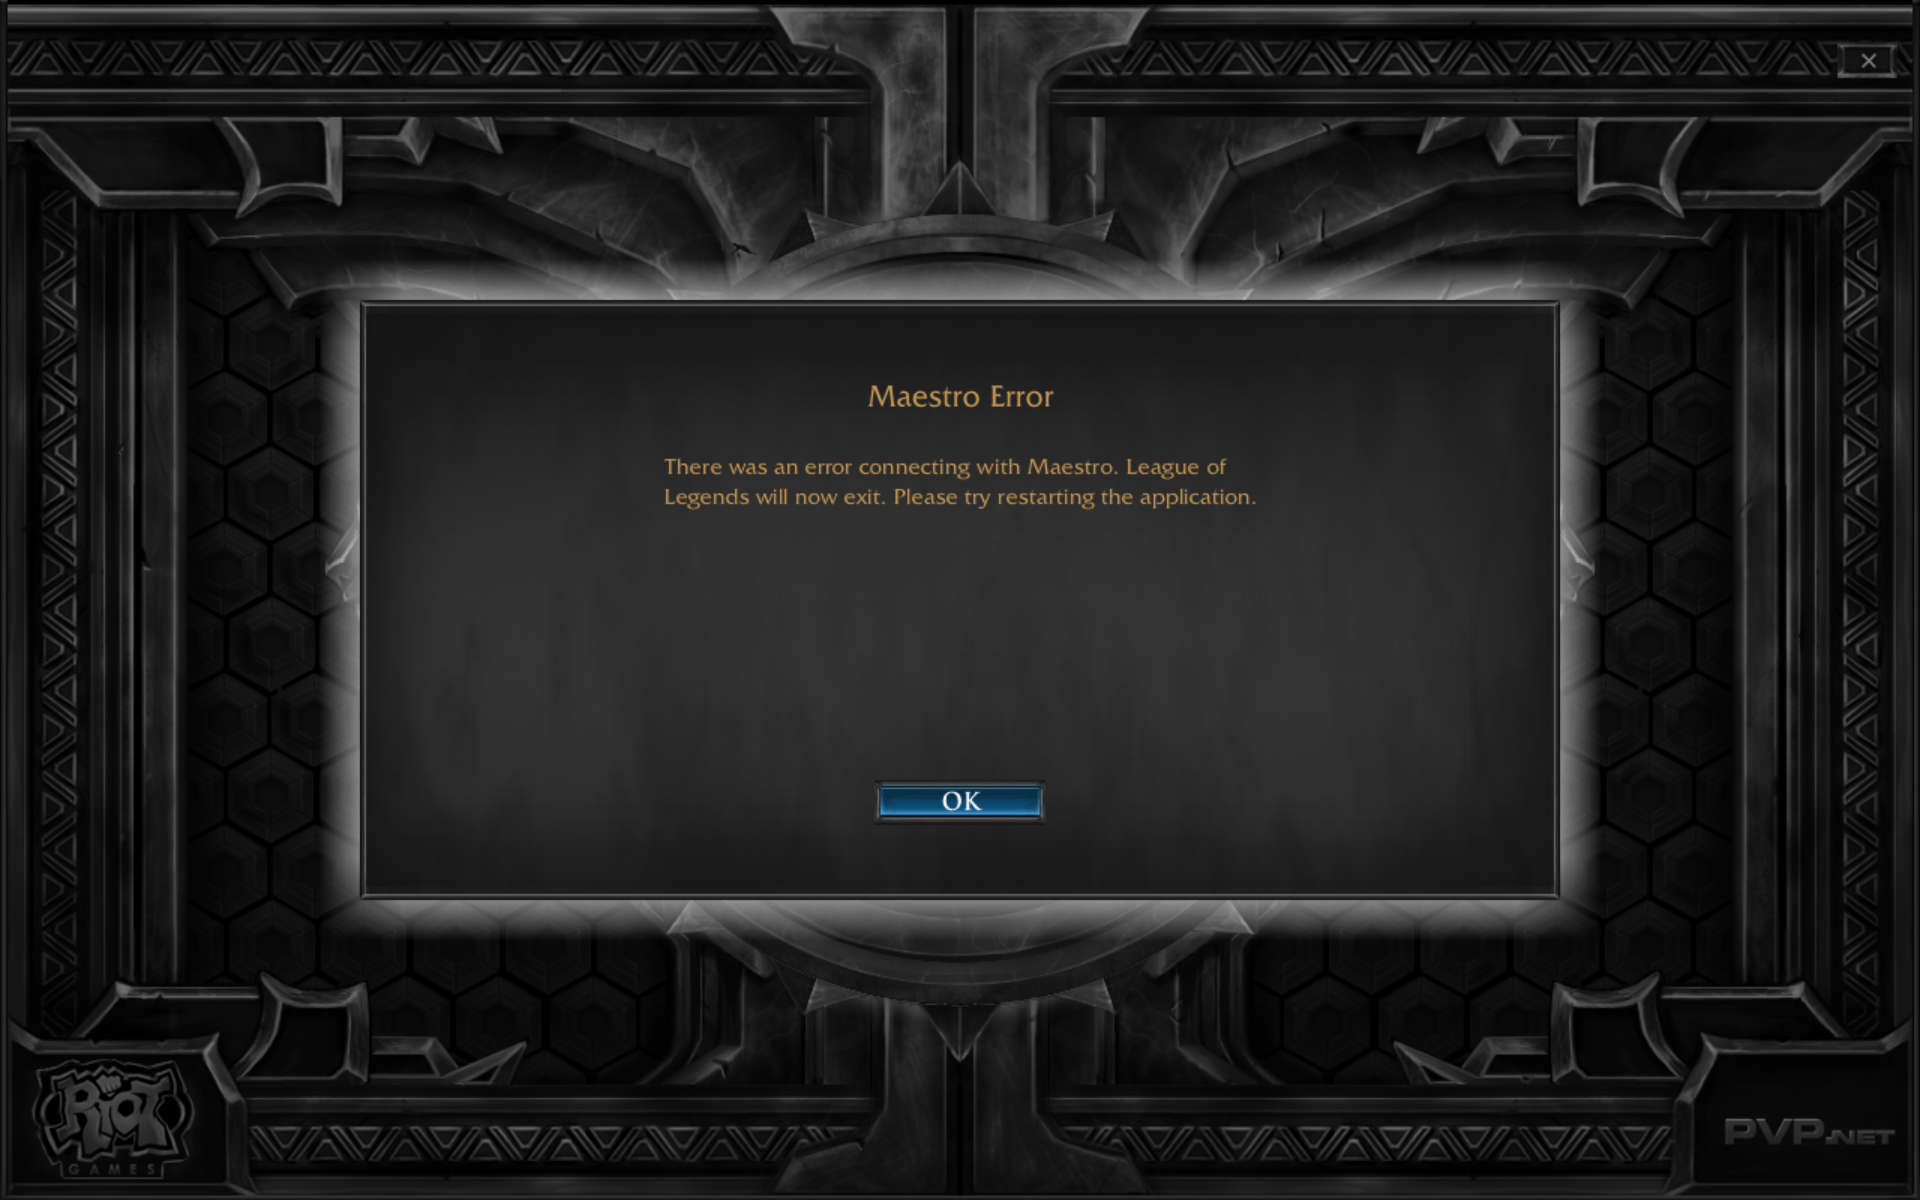 But of course, players will not be able to log into the game in this version of the client.